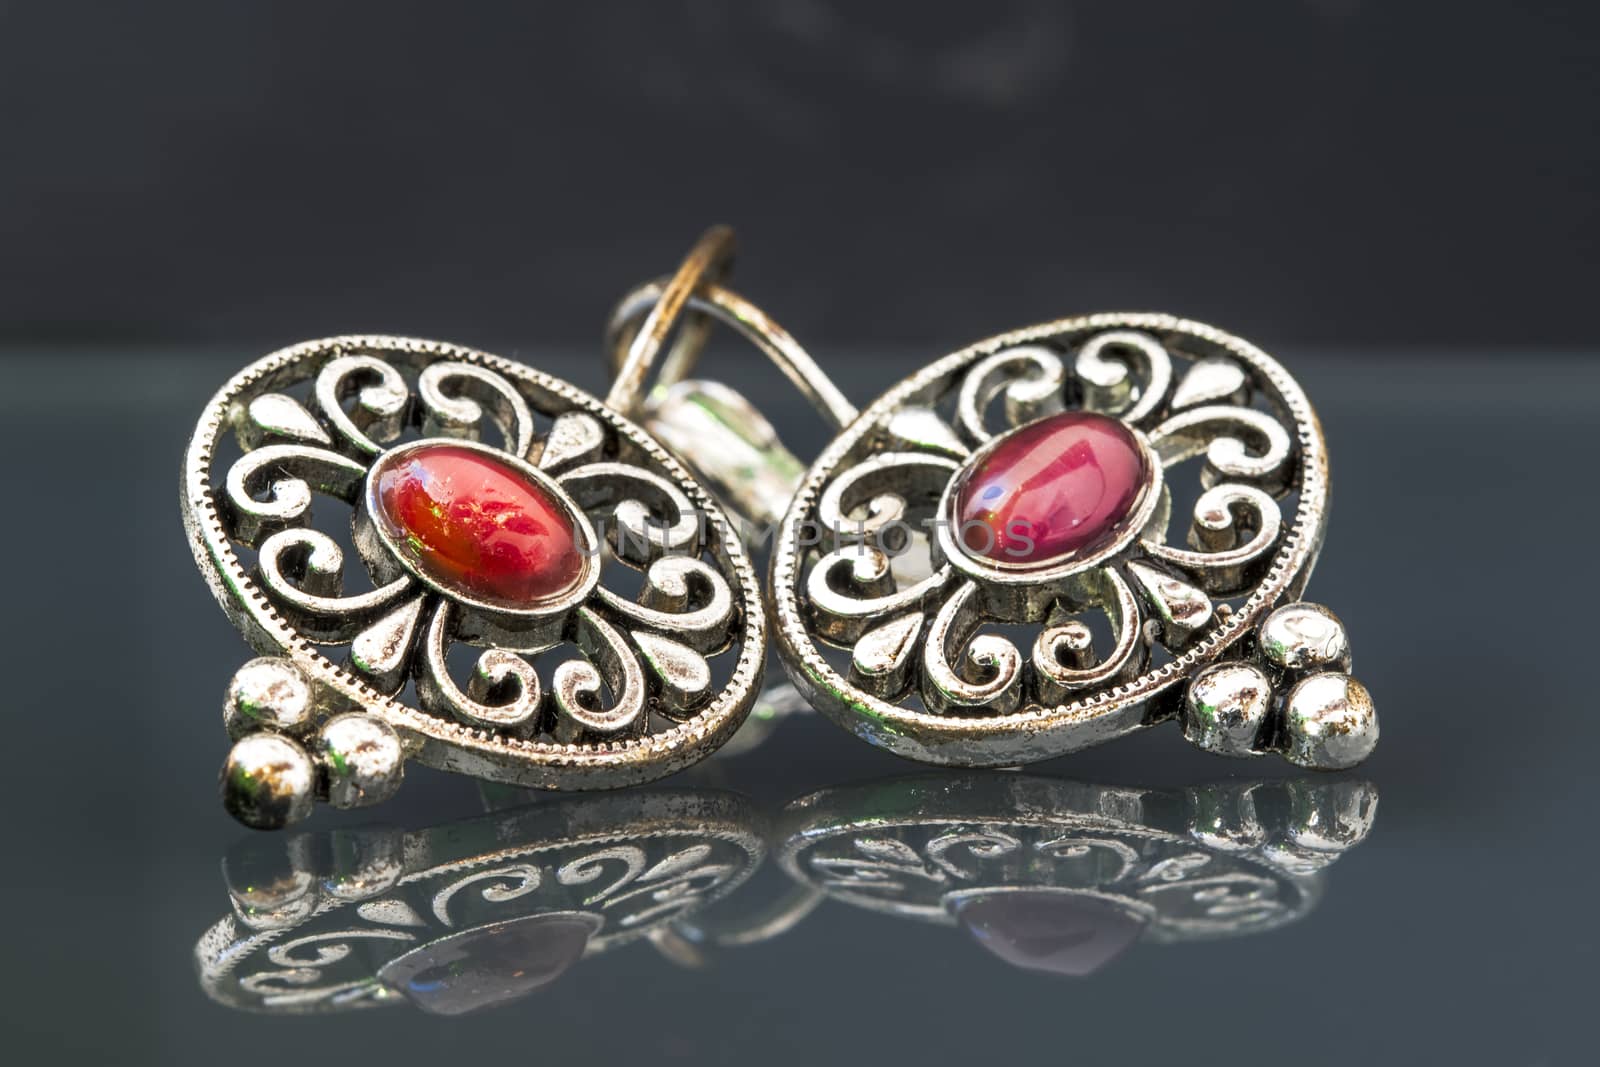 Silver earrings with red gems on dark background with reflection by asafaric